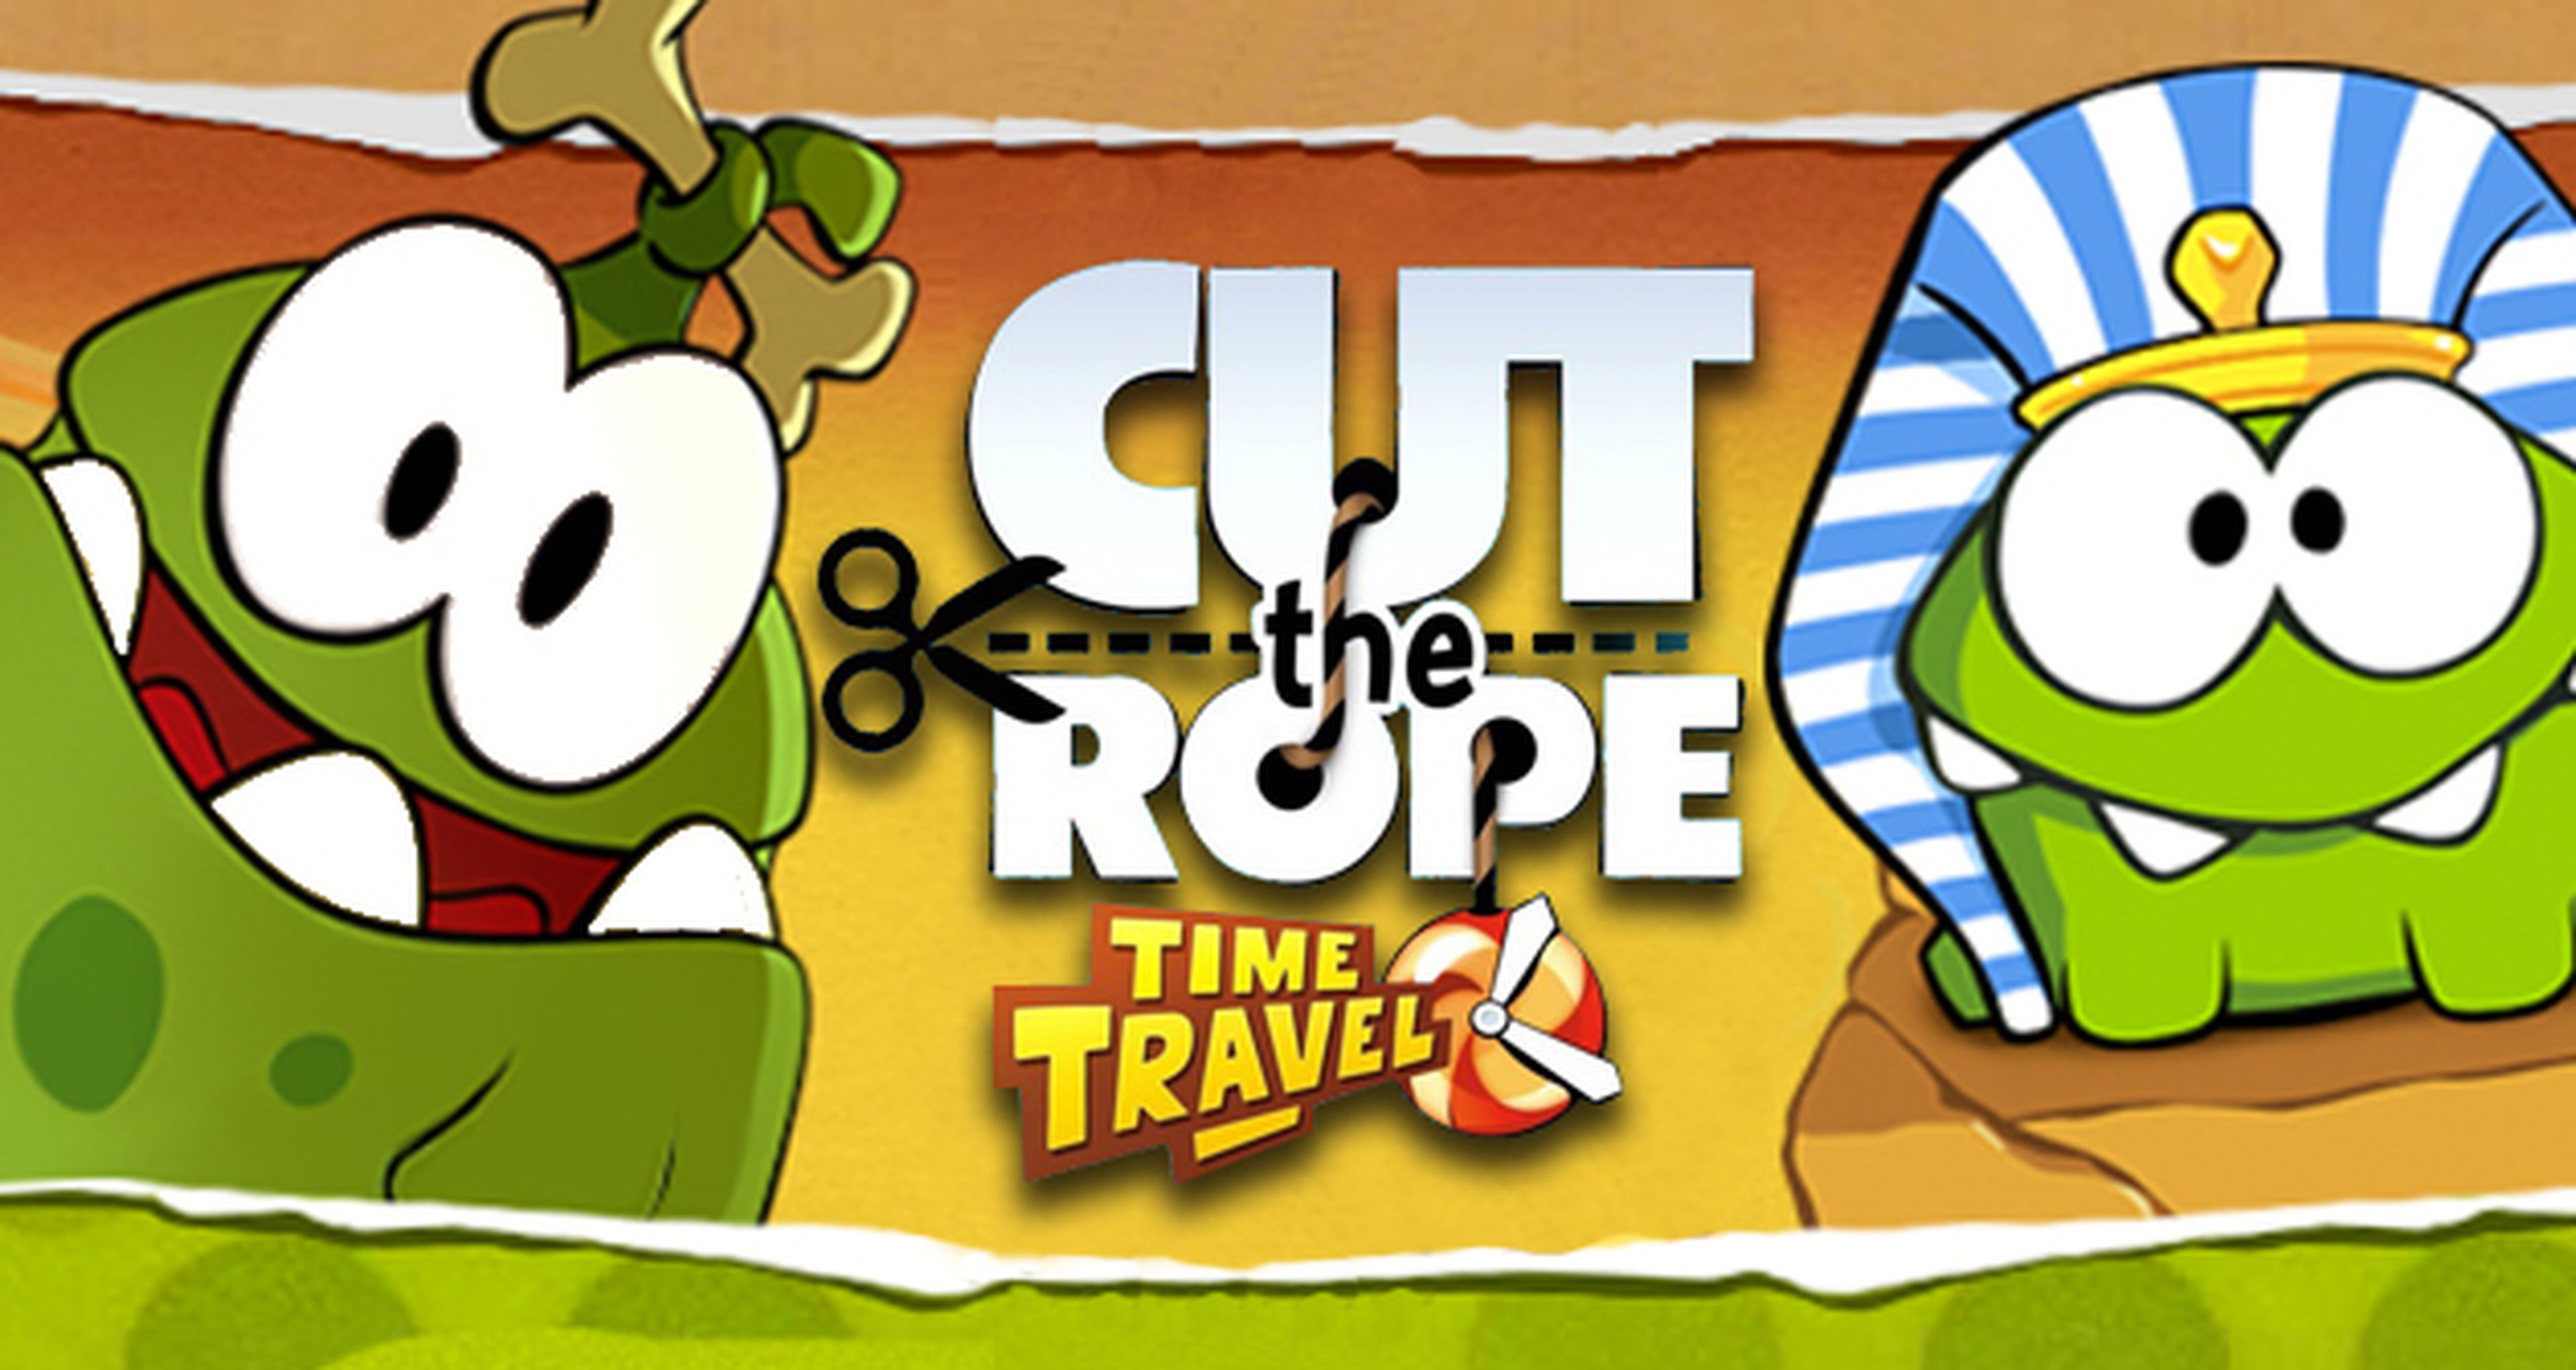 Análisis de Cut the Rope Time Travel para iOS y Android